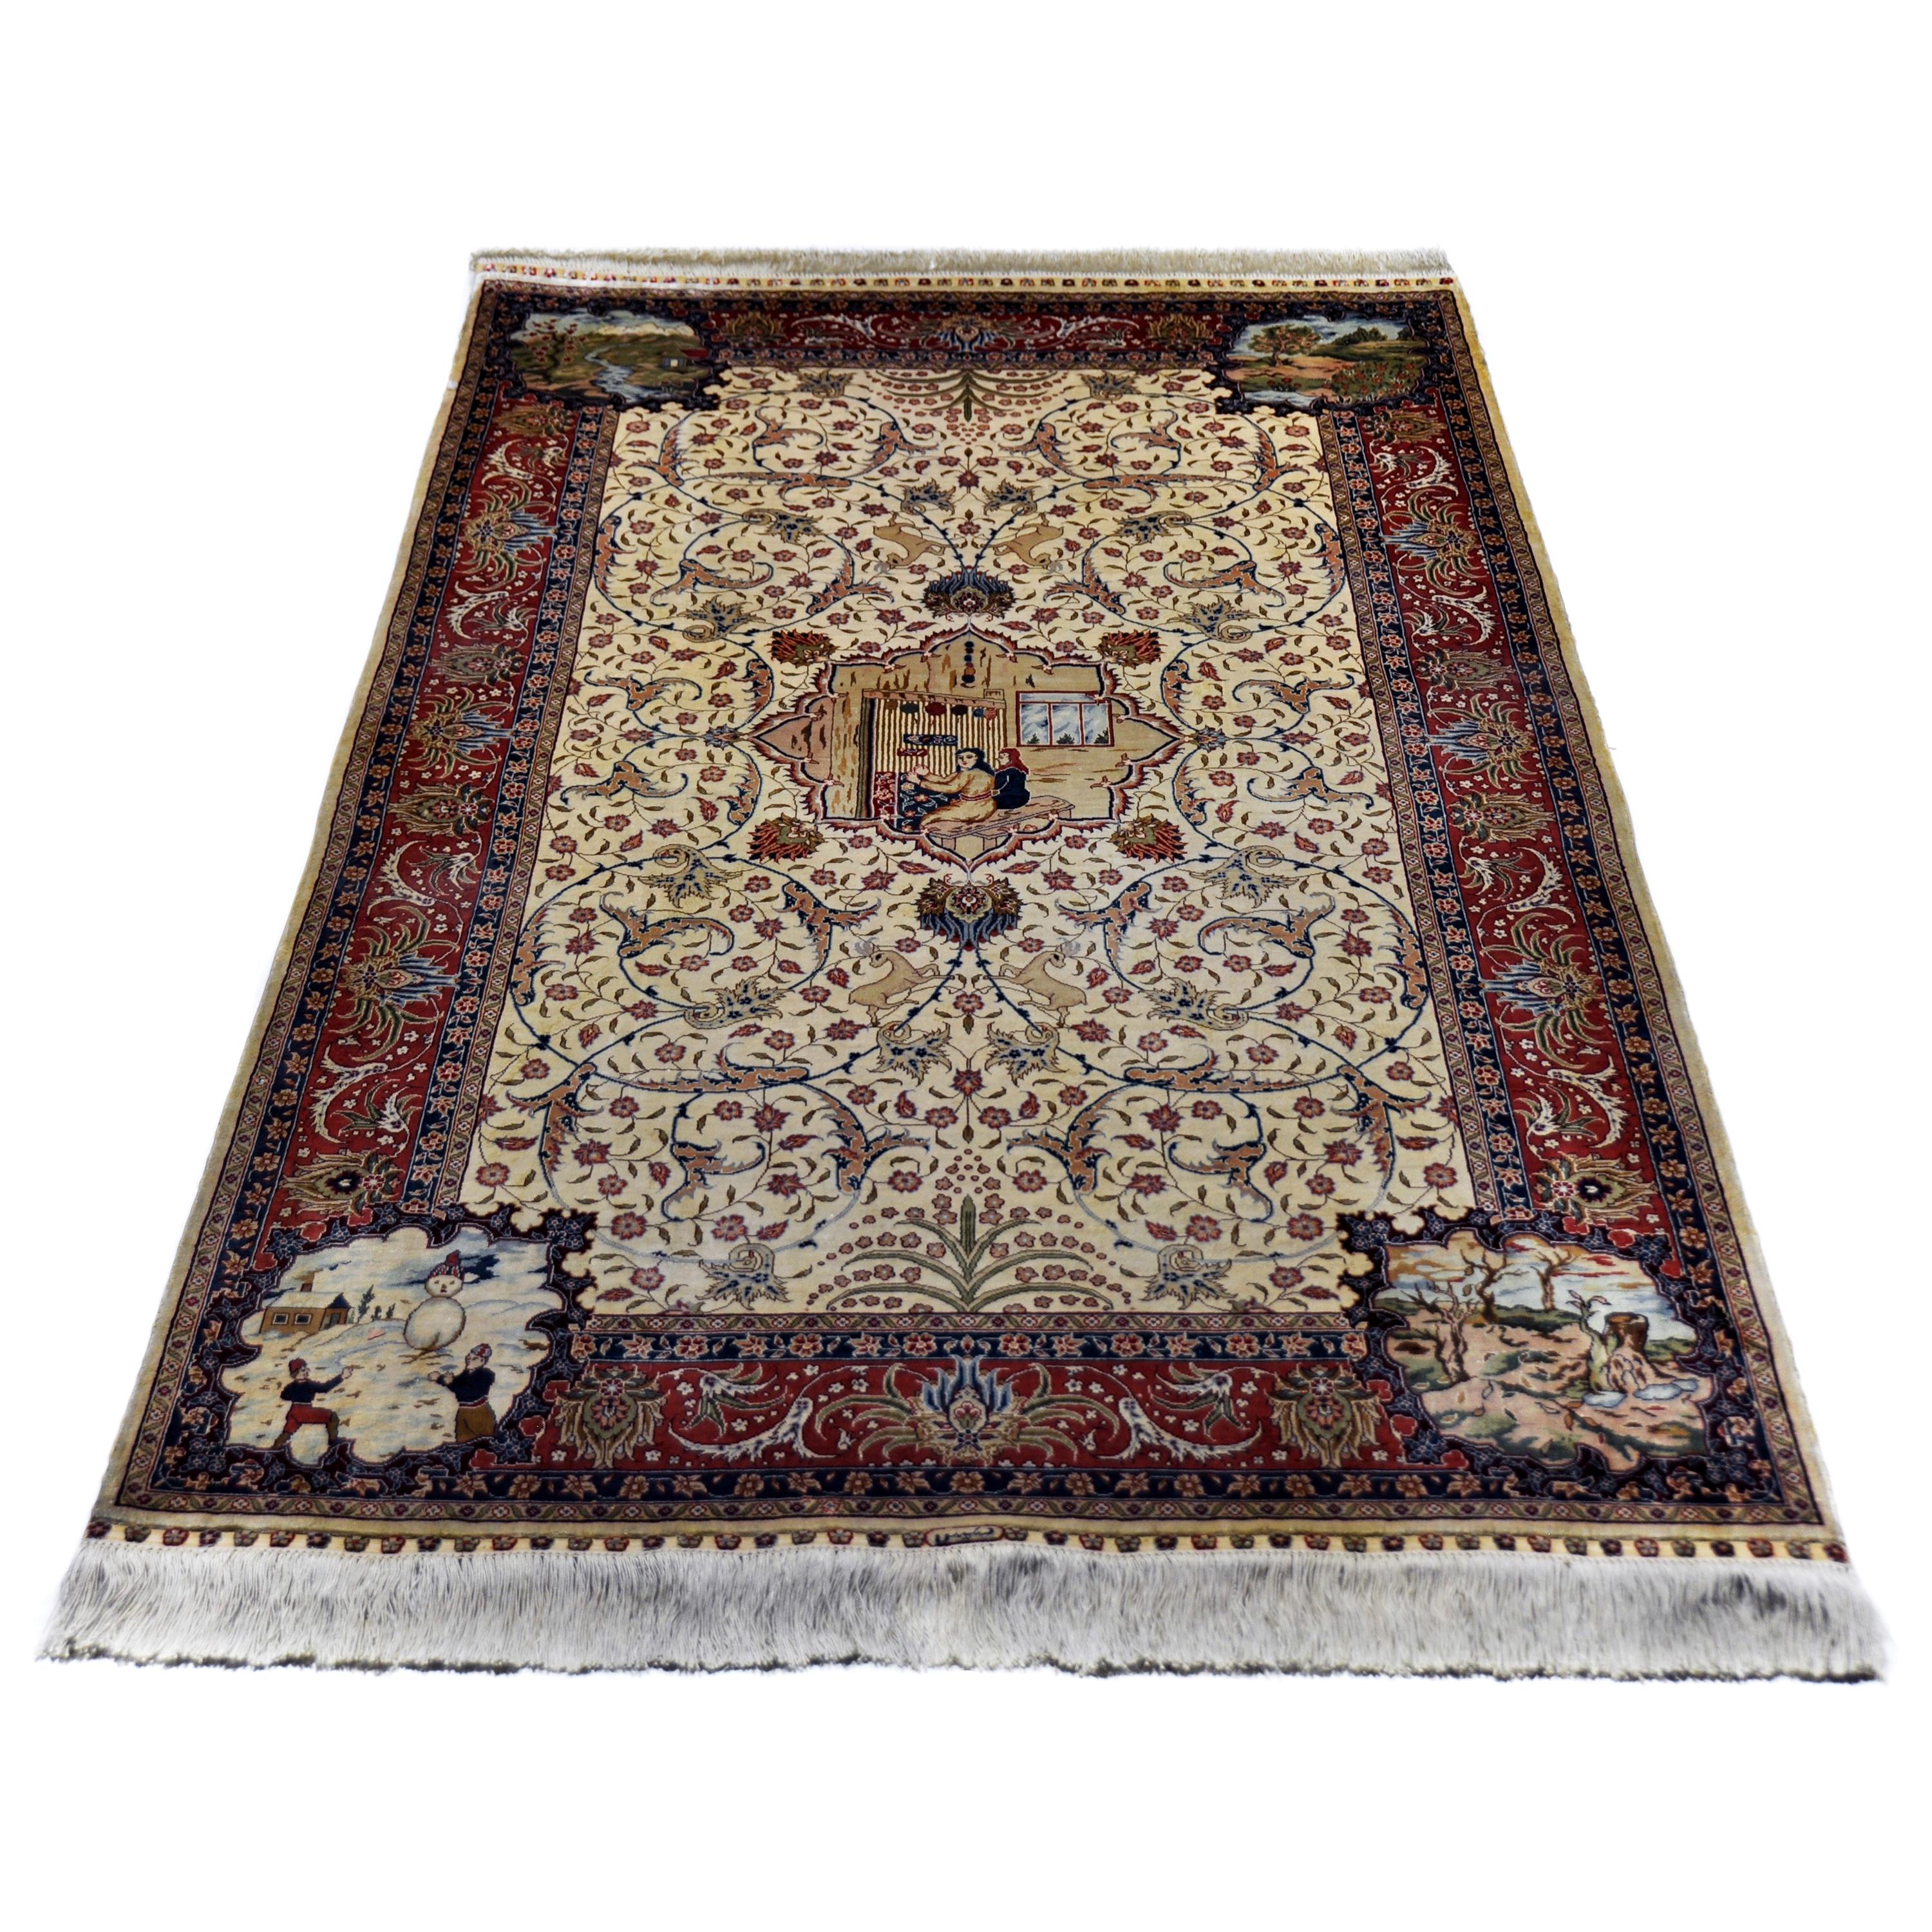 Antique Hand Knotted Silk Beige and Red - Rug - Carpet - Hereke with Flowers For Sale